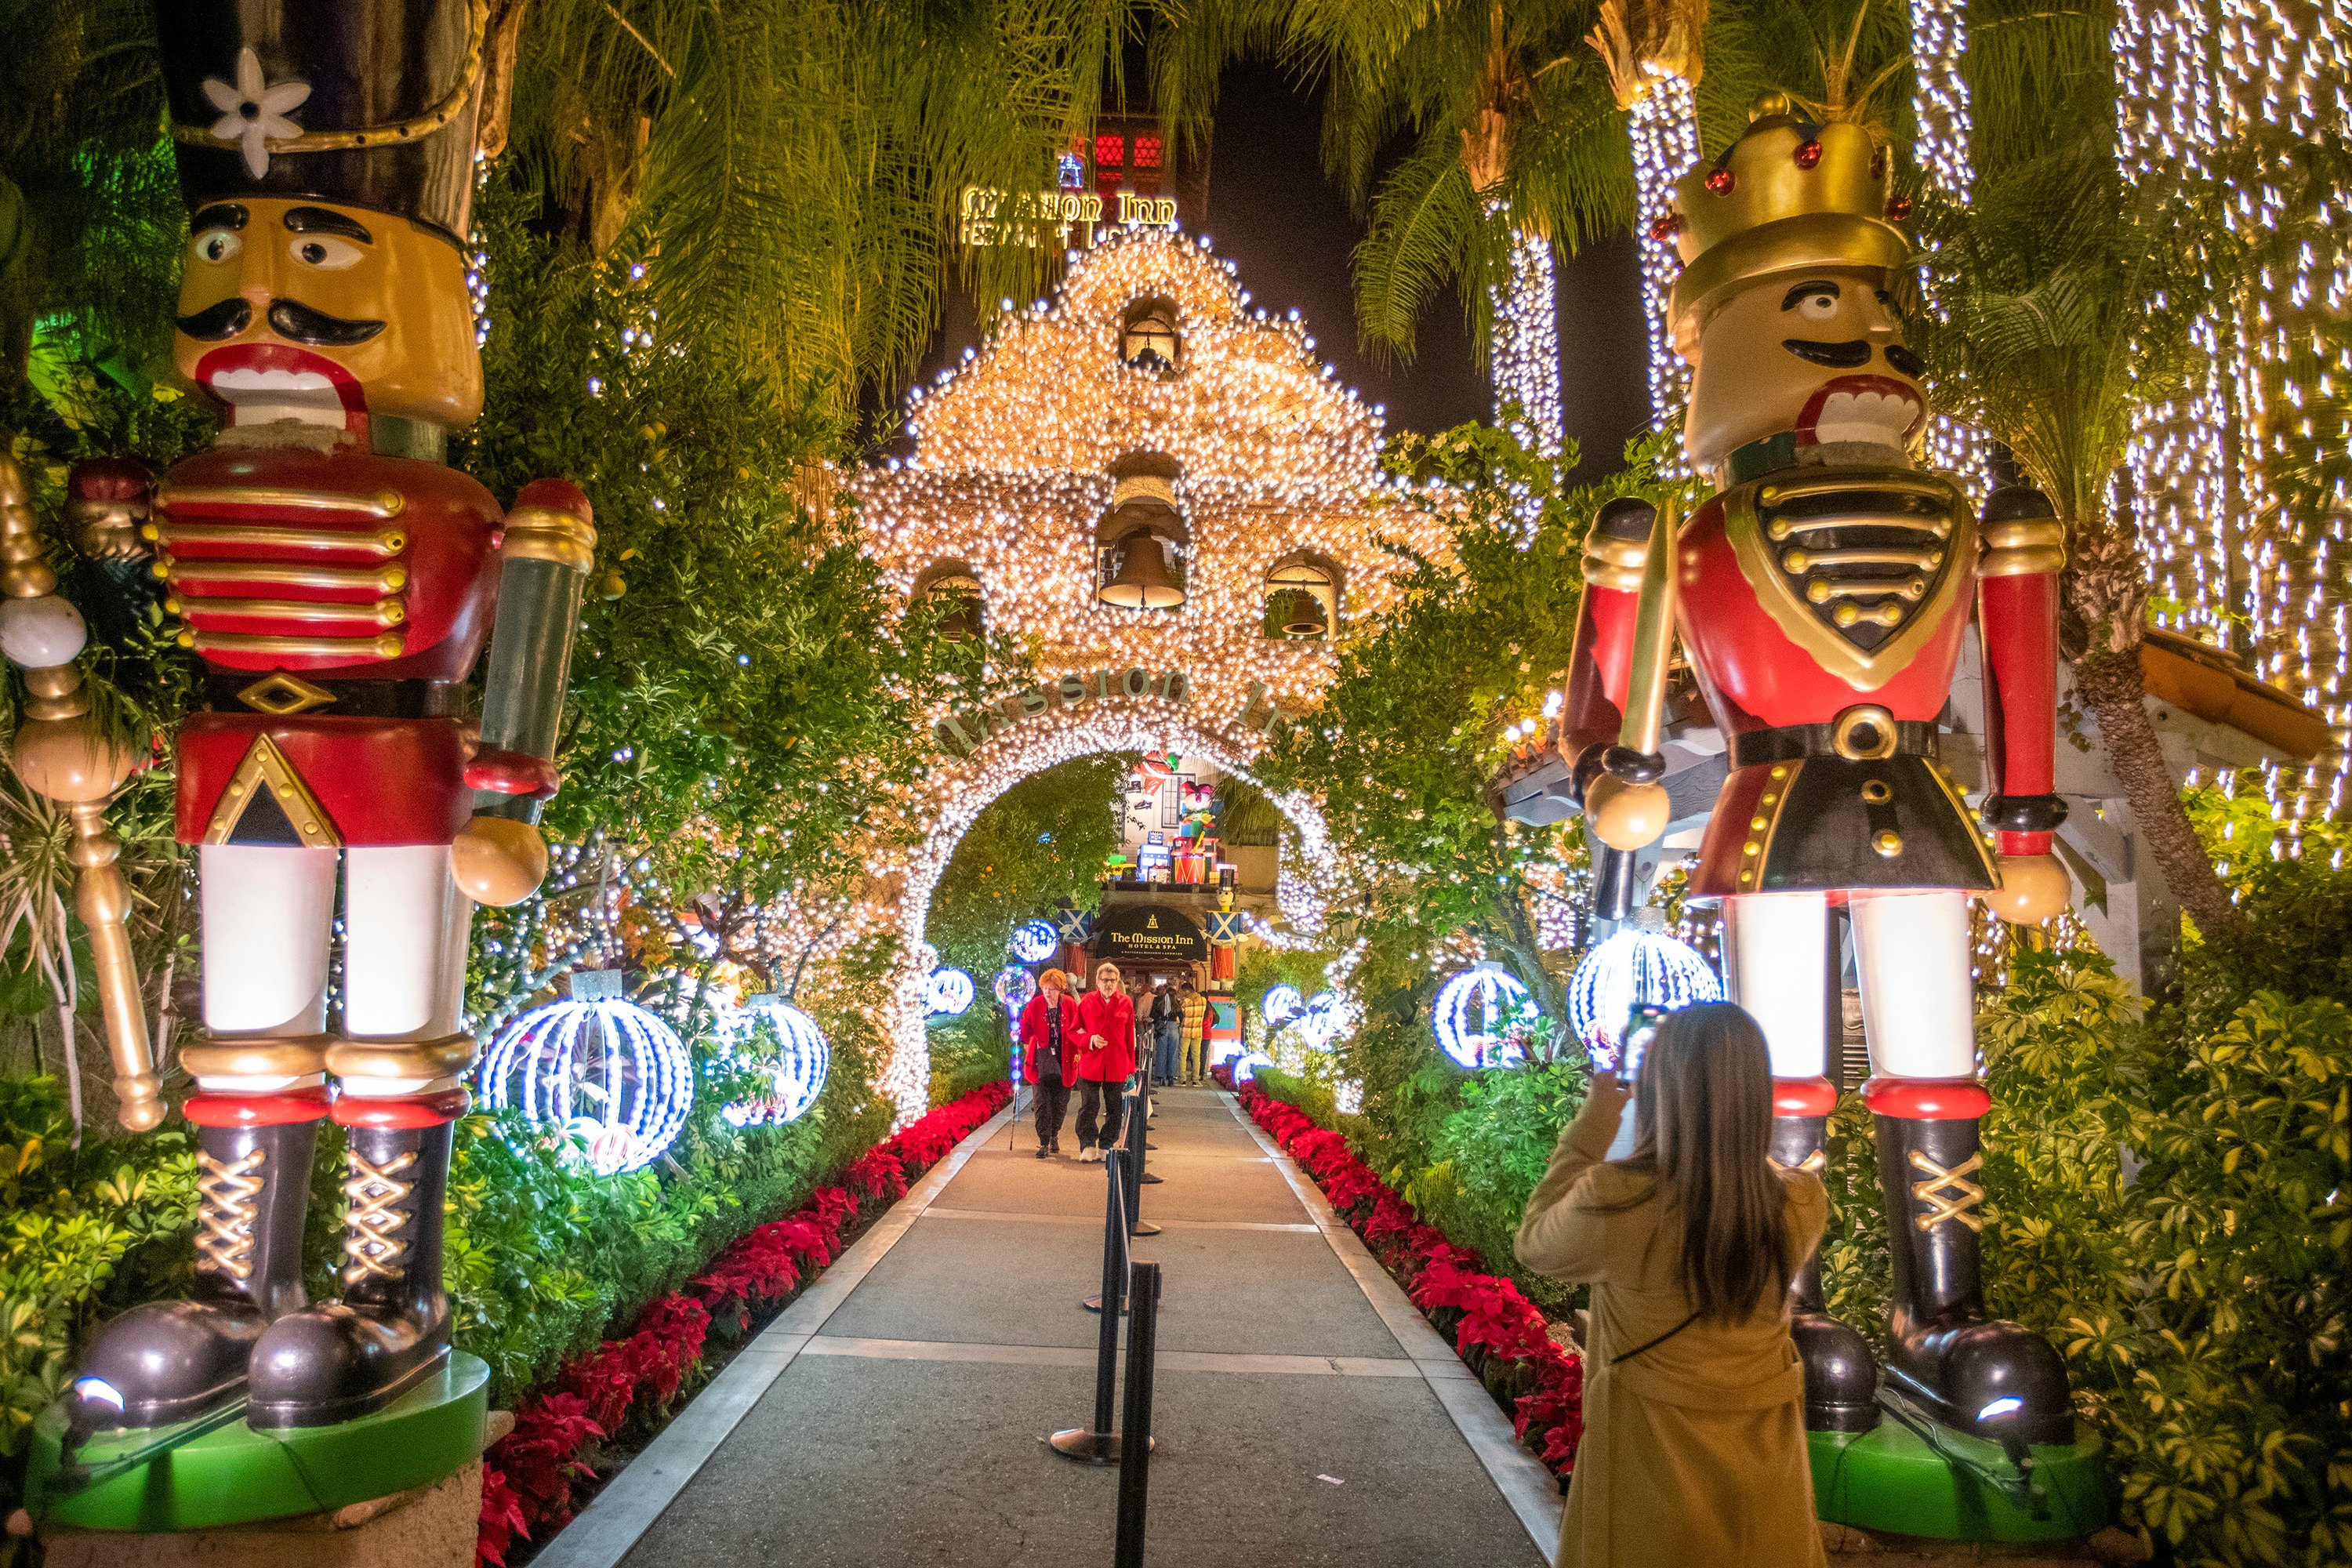 25 over-the-top Christmas displays from across America